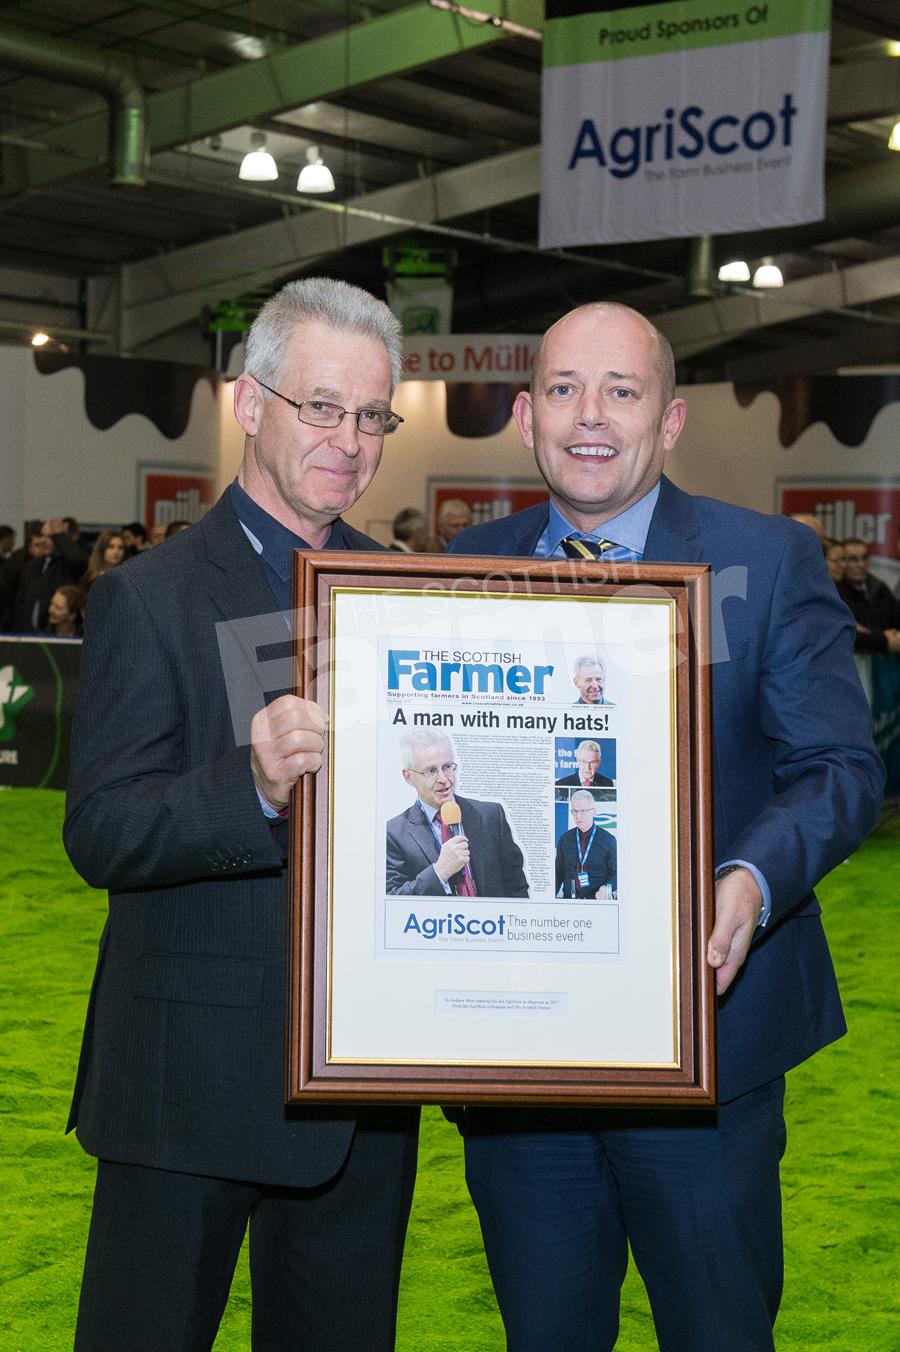 Andrew Moir is stepping down as Agriscot Chairman and Scottish Farmer Publisher Darren Bruce is presenting him with a framed gift. Ref: RH1511170198.